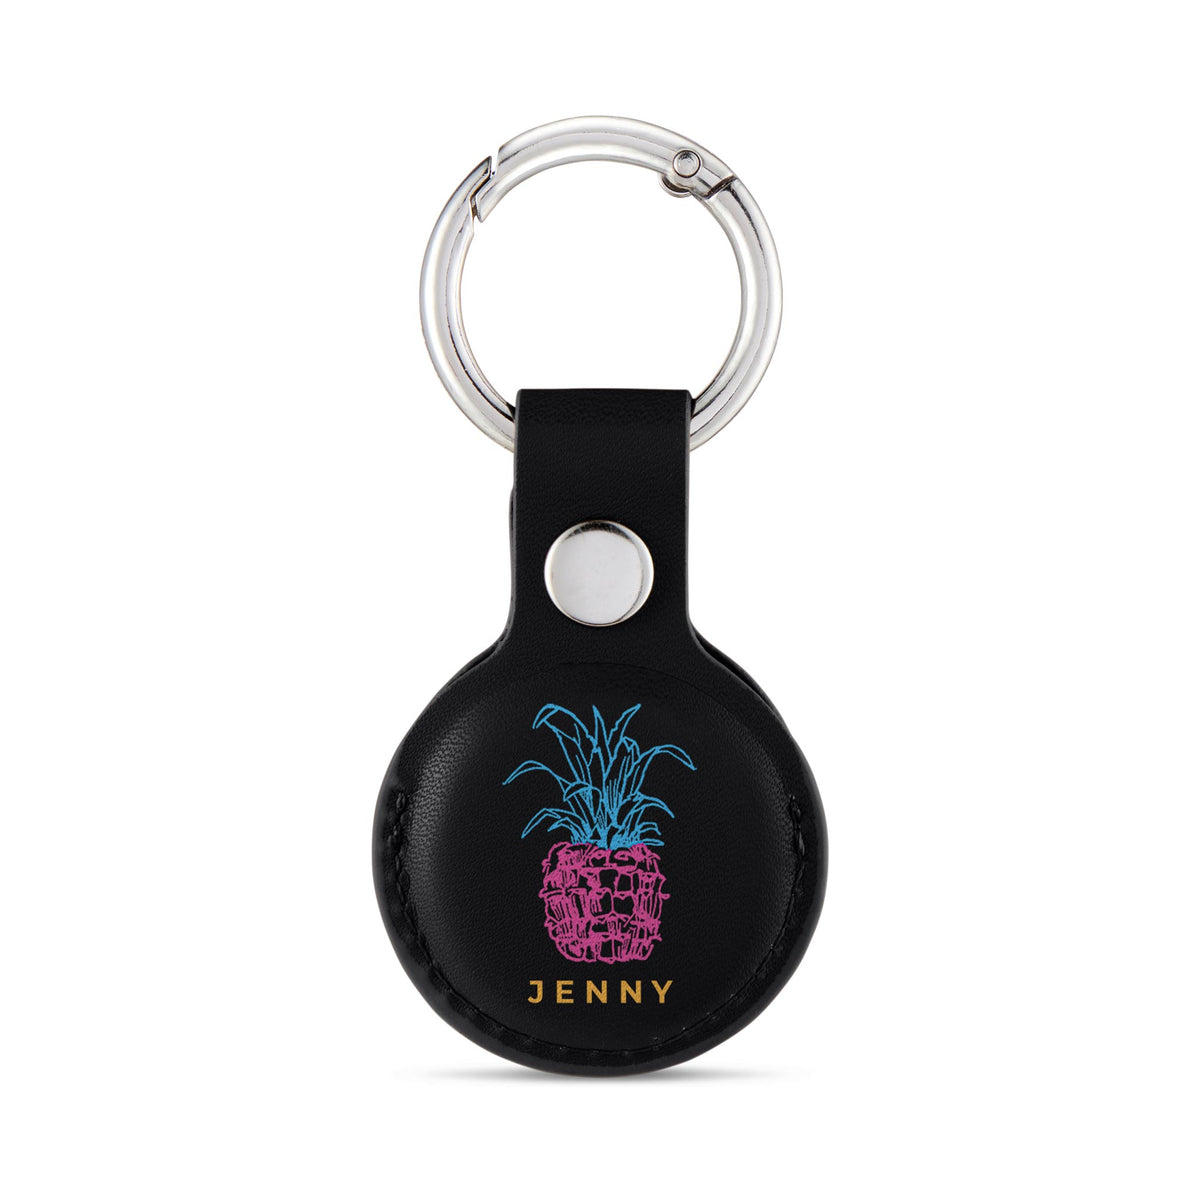 Personalised AirTag Case Keyring Holder Keychain Holder for Air Tag Tracking Device Pineapple Pink Name on Black